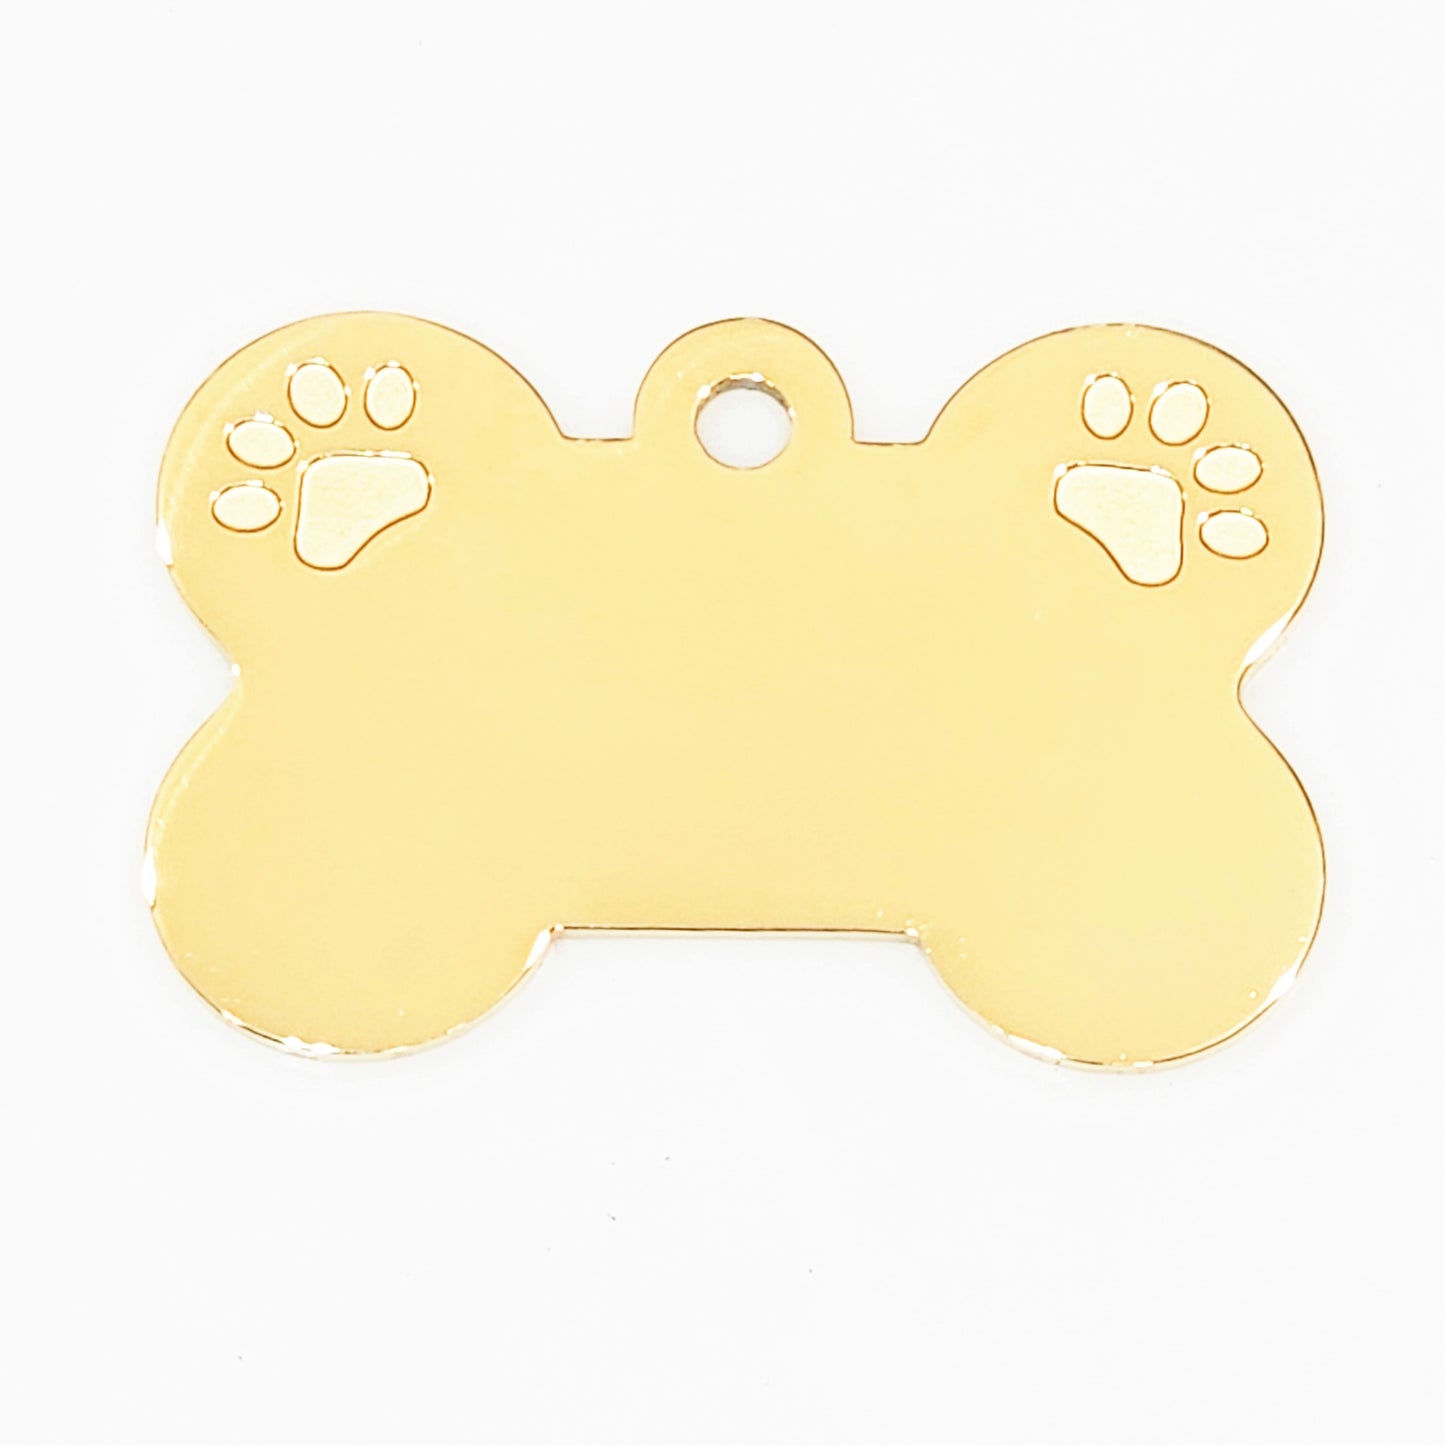 Gold Plated Dog Bone with Two Paws - 24mm x 36mm